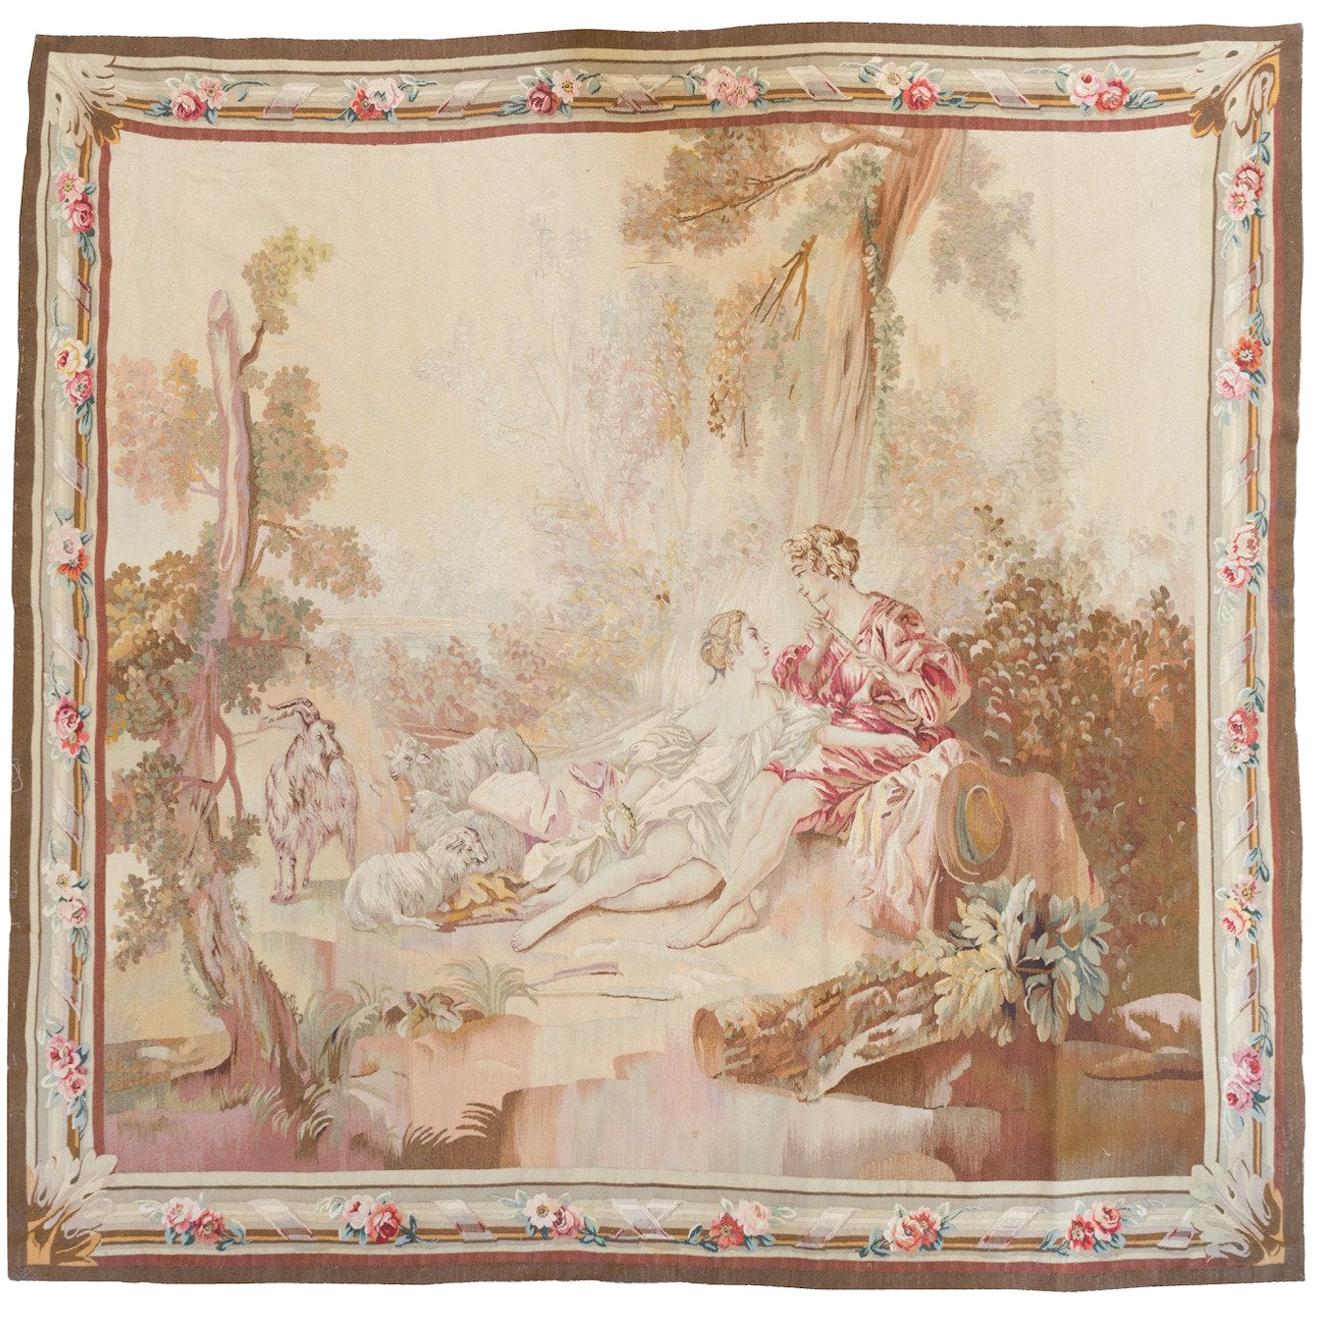 Antique 19th Century Square French Aubusson Tapestry with Lovers